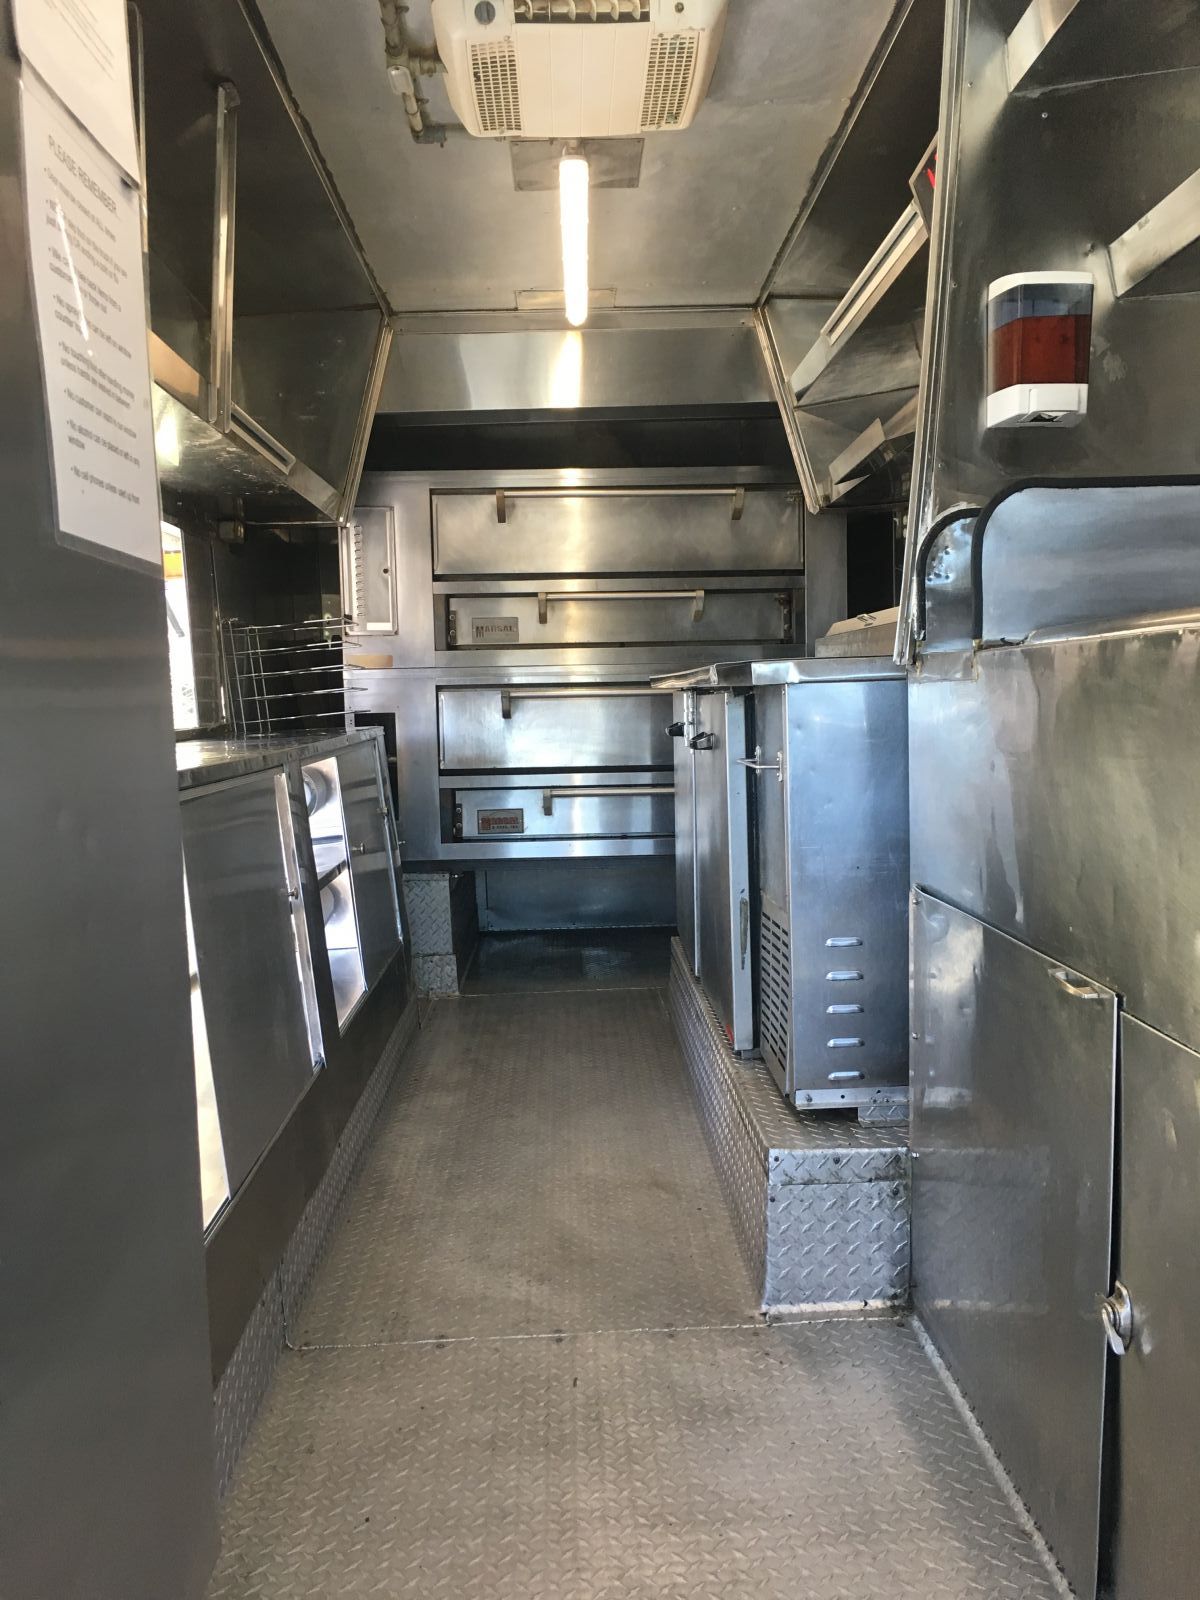 2005 Workhorse Pizza Food Truck For Sale In California Https